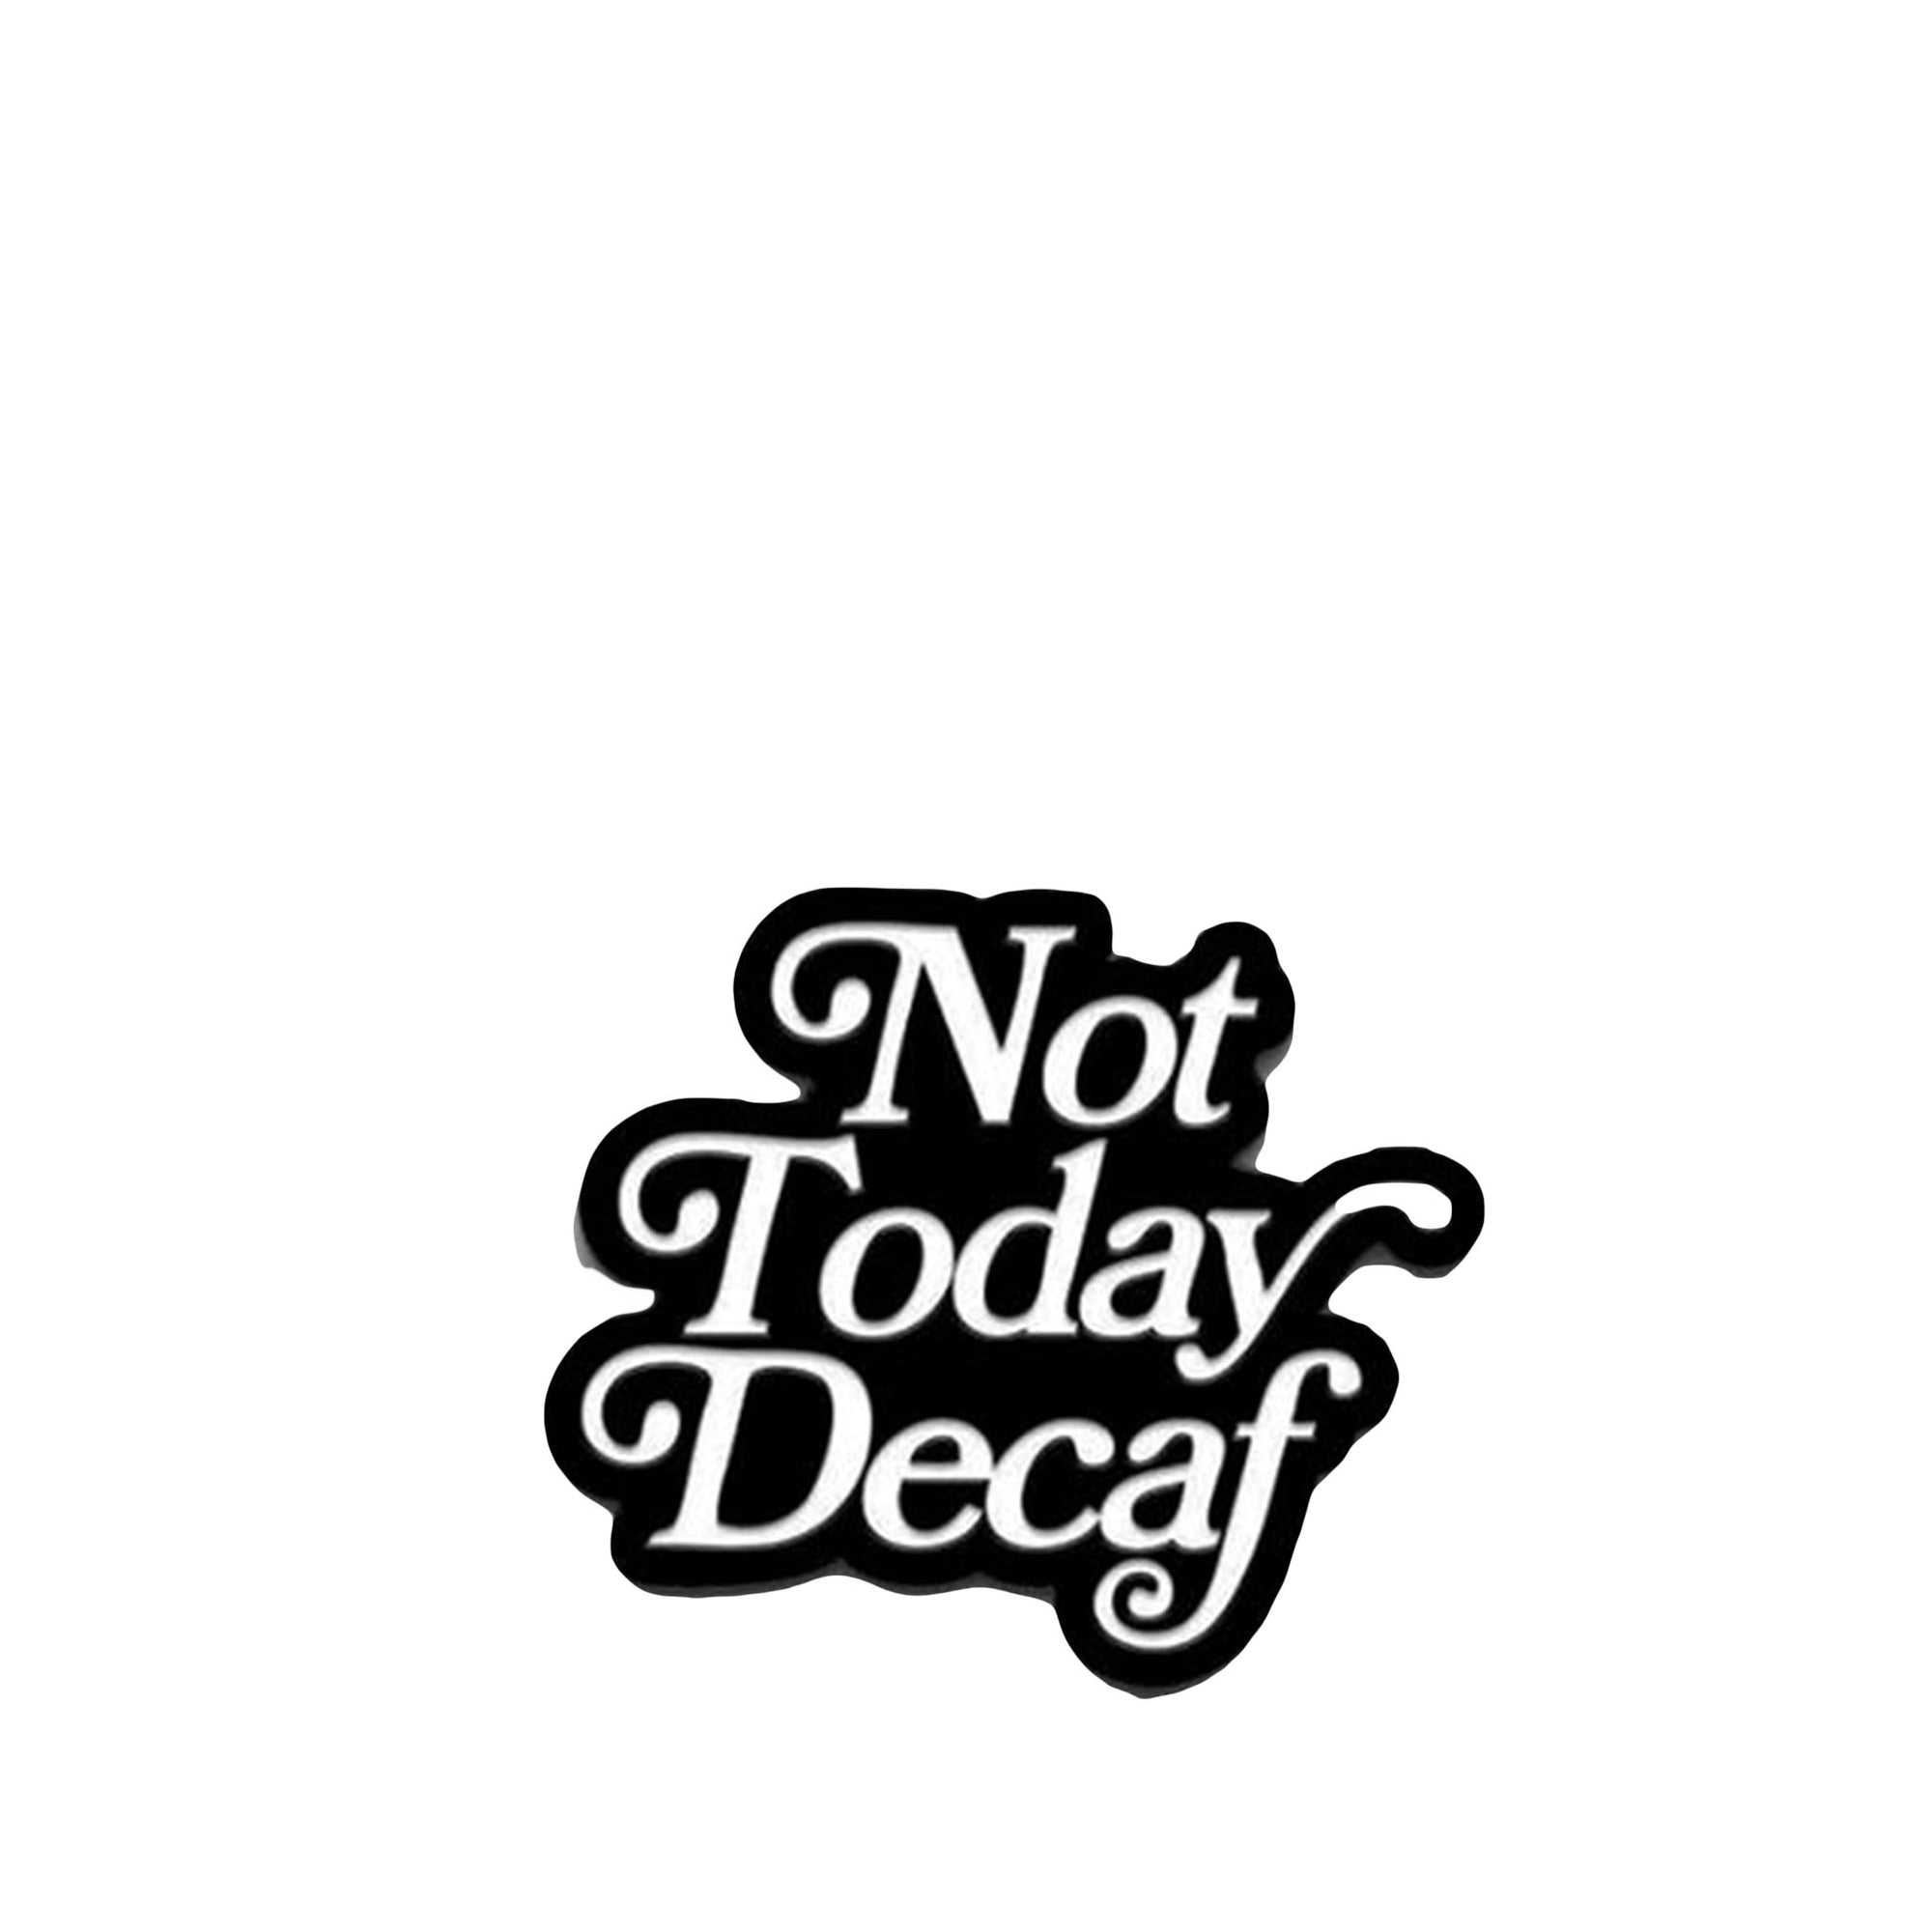 Not Today Decaf Pin - Department of Brewology - Espresso Gear